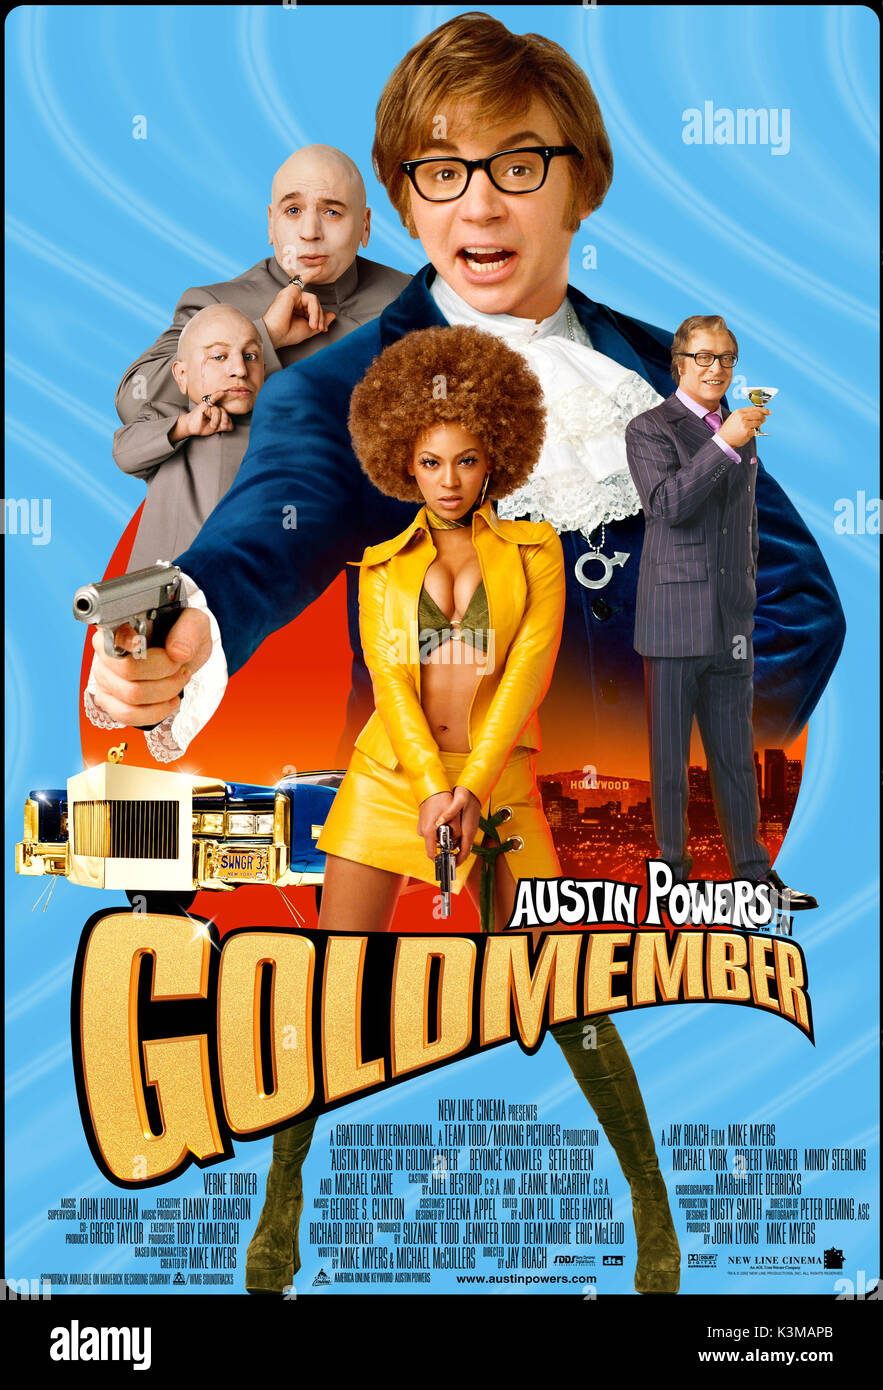 AUSTIN POWERS IN GOLDMEMBER [US 2002] MIKE MYERS, BEYONCE, VERNE TROYER, MICHAEL CAINE     Date: 2002 Stock Photo